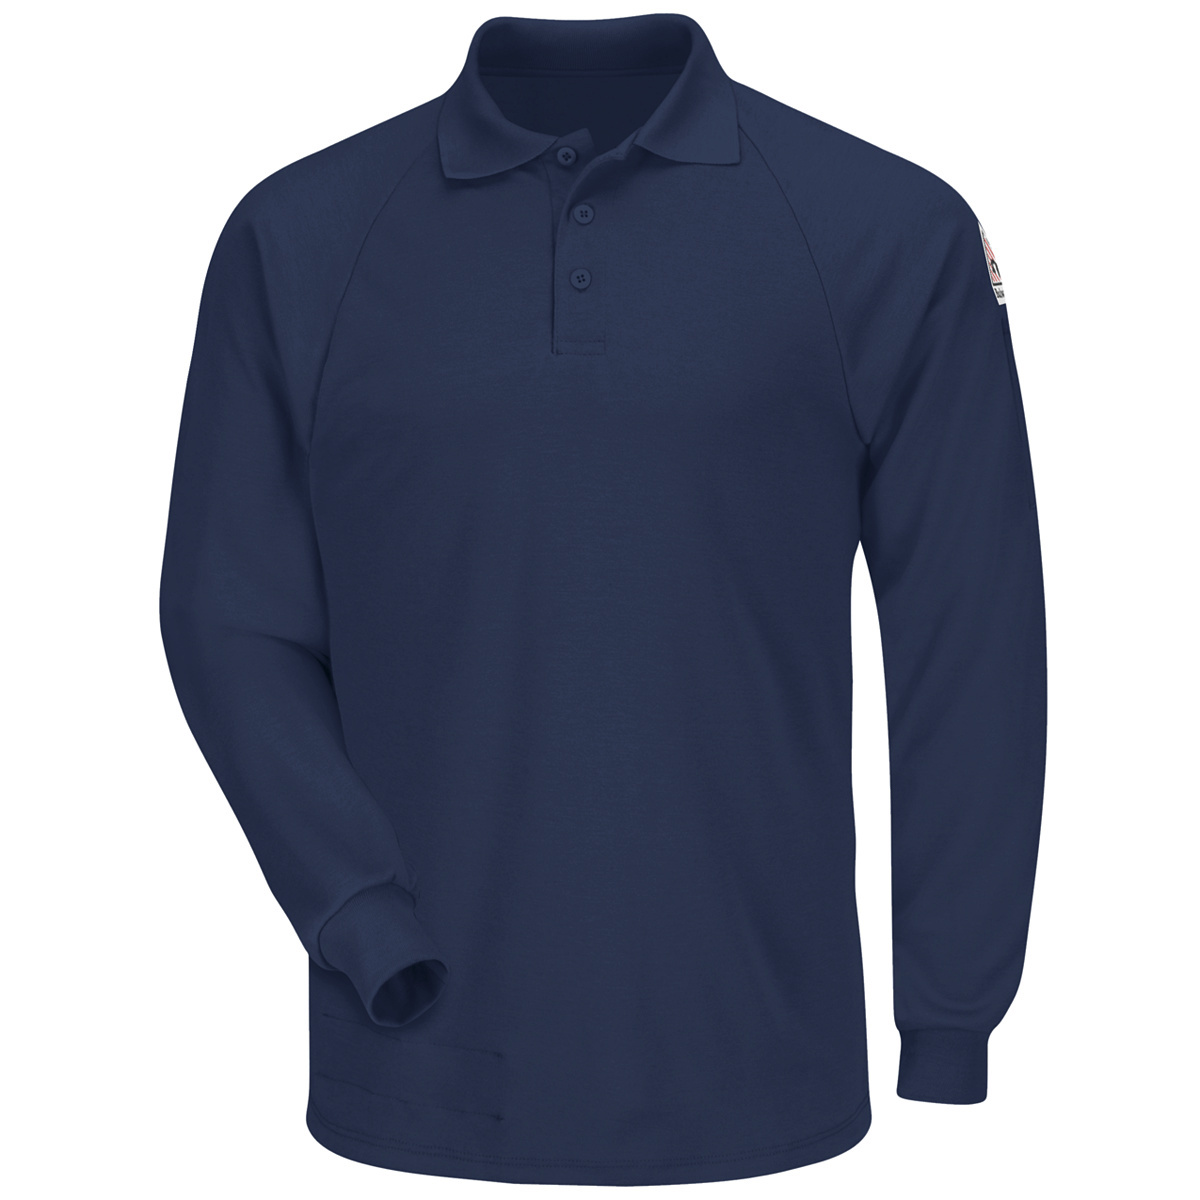 Bulwark® X-Large Regular Navy Blue Swiss Pique/Modacrylic/Lyocell/Aramid Flame Resistant Polo With Button Front Closure